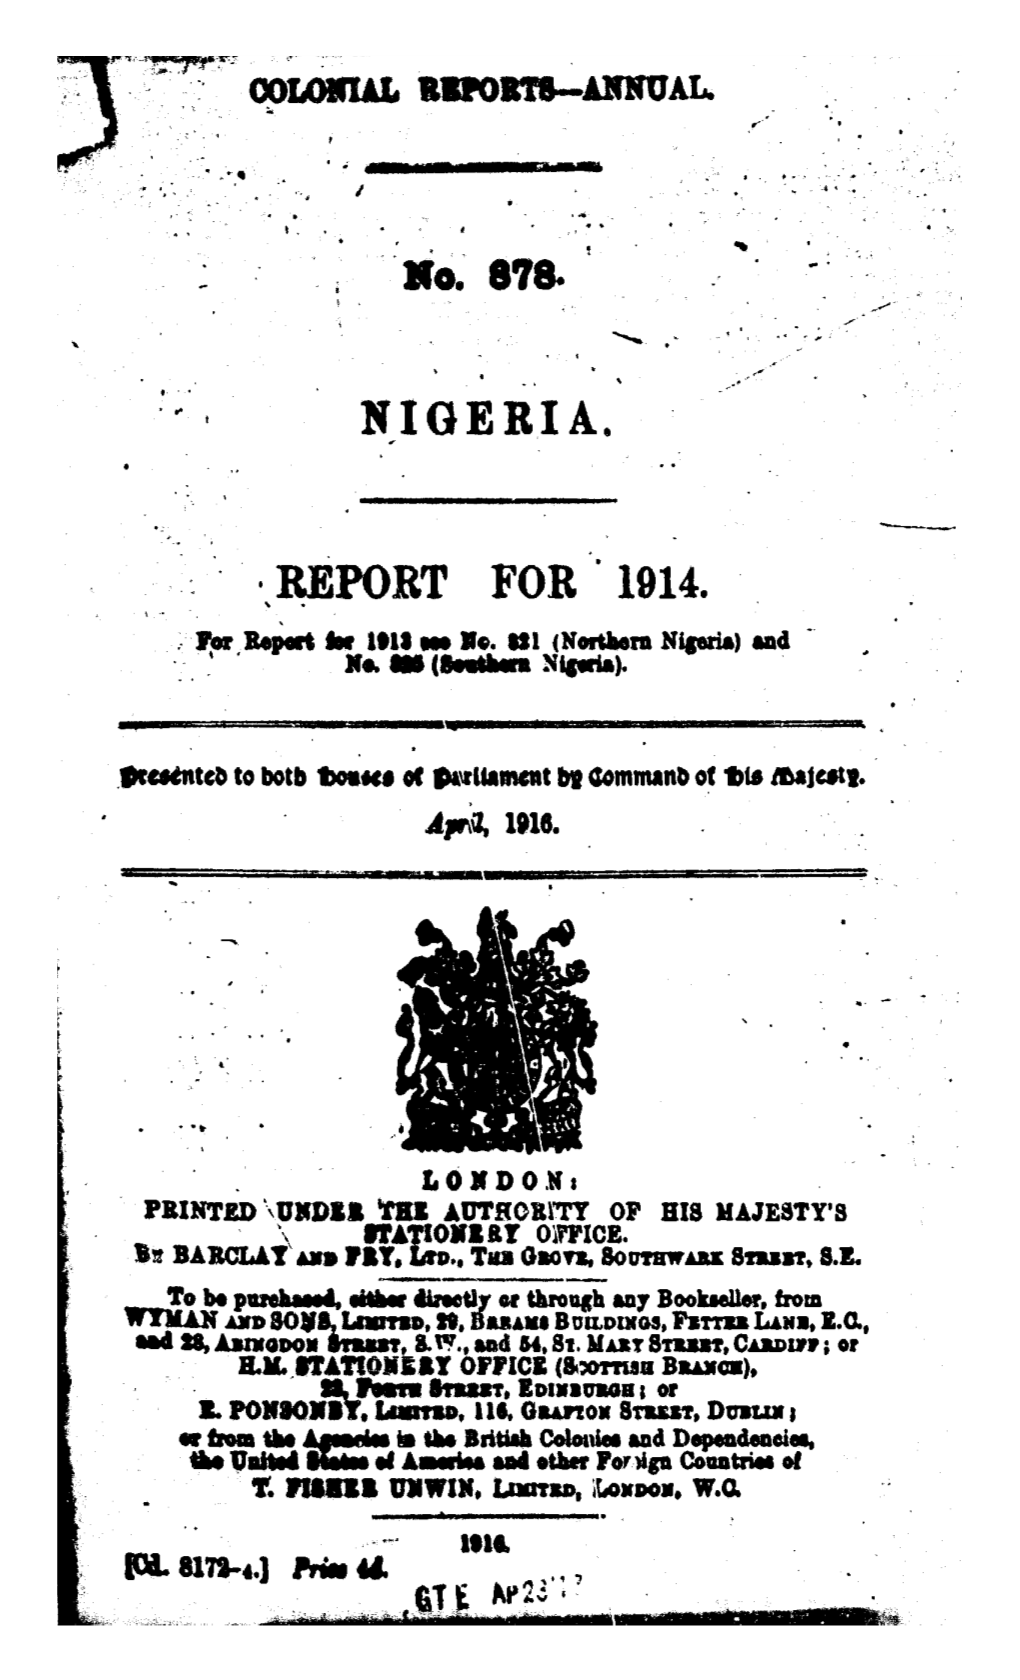 Annual Report of the Colonies, Nigeria, 1914